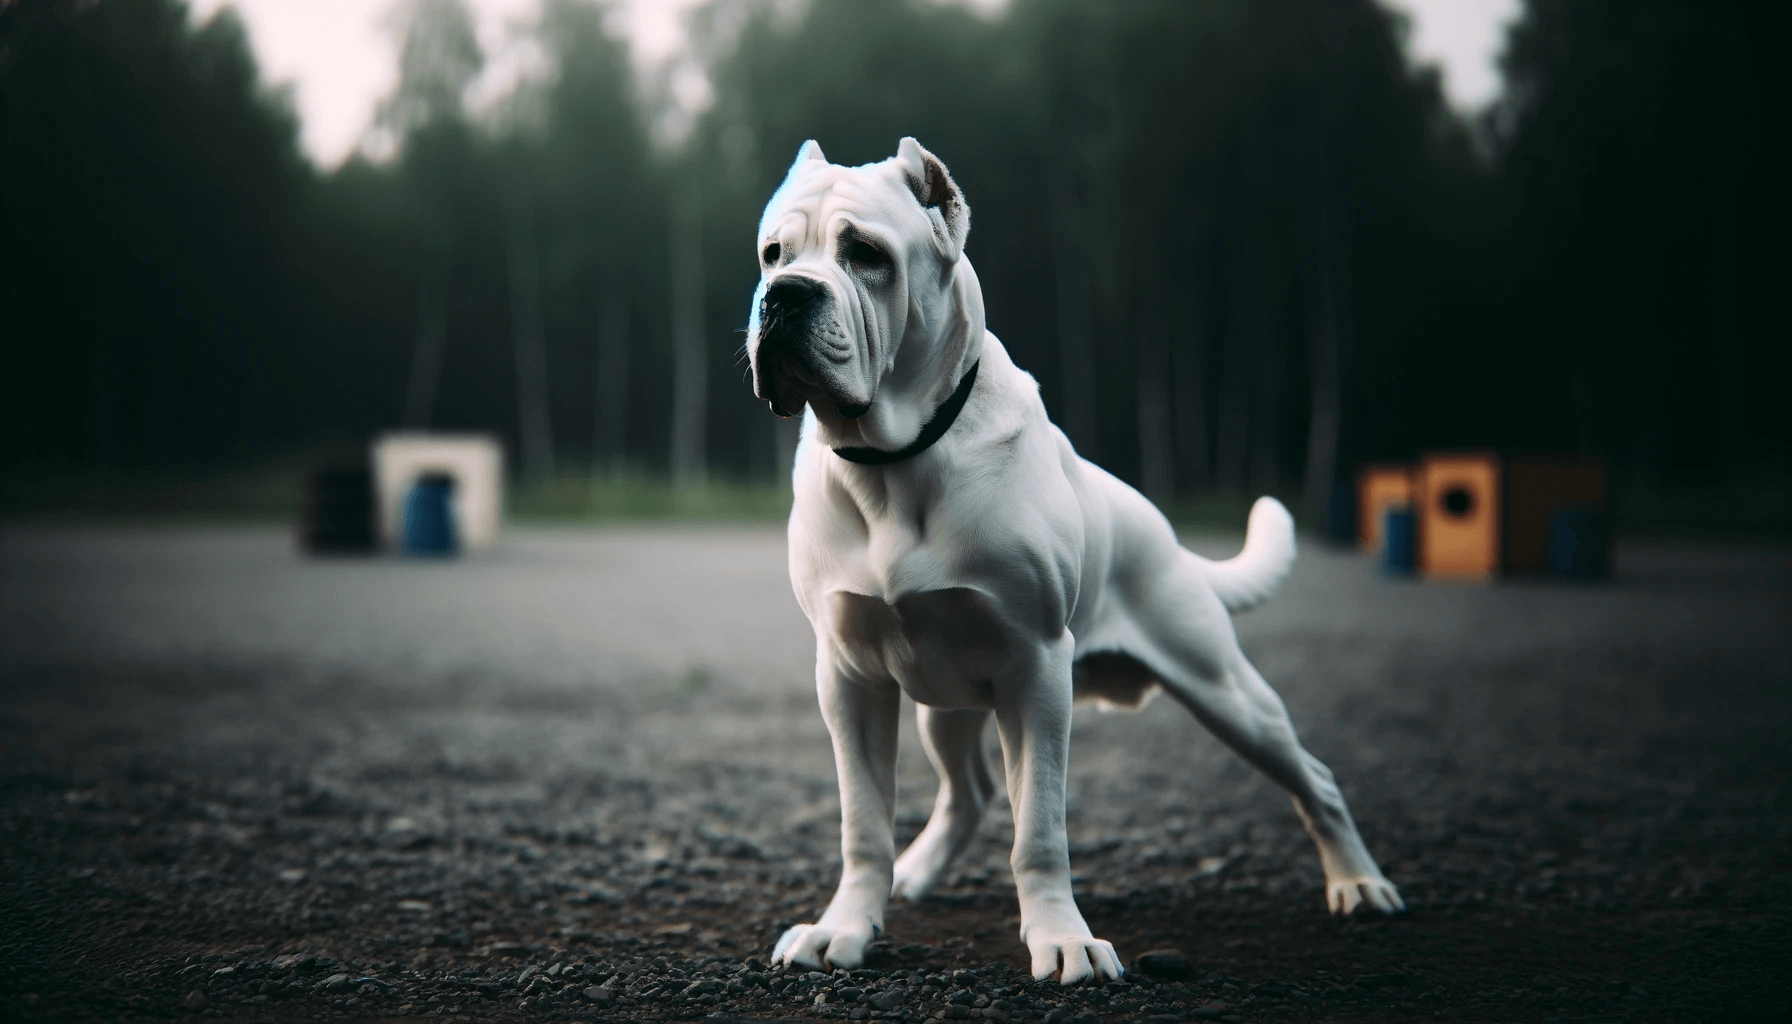 A White Cane Corso in a stance indicating alertness and readiness, possibly during a training session.